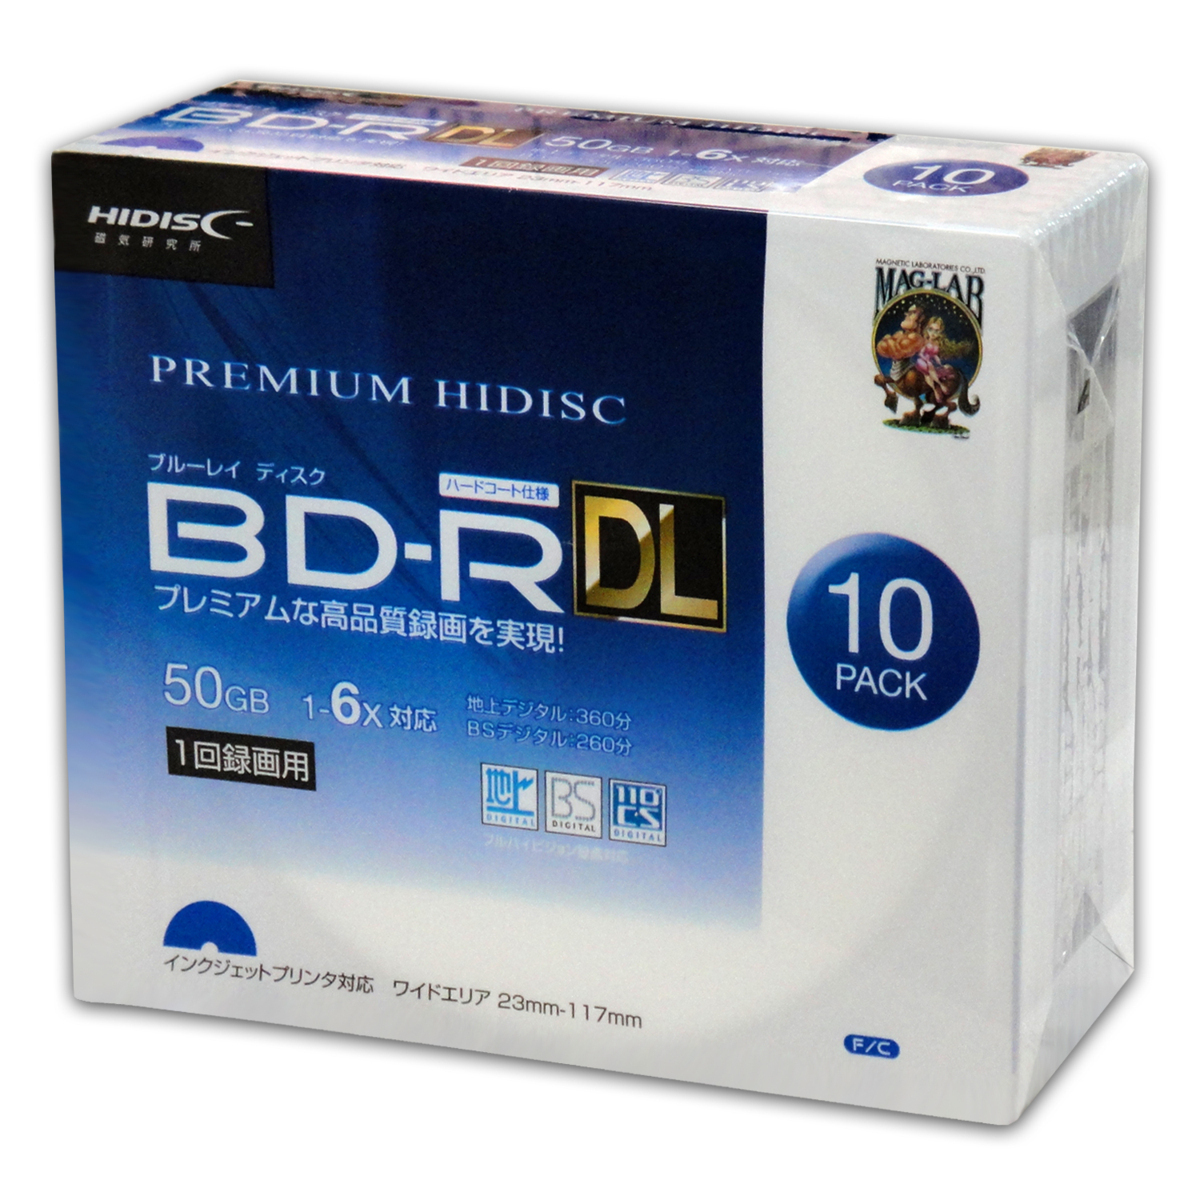  free shipping BD-R DL video recording for Blue-ray 10 sheets pack 2 layer 50GB 6 speed slim in the case HIDISC HDVBR50RP10SC/0758x1 piece 